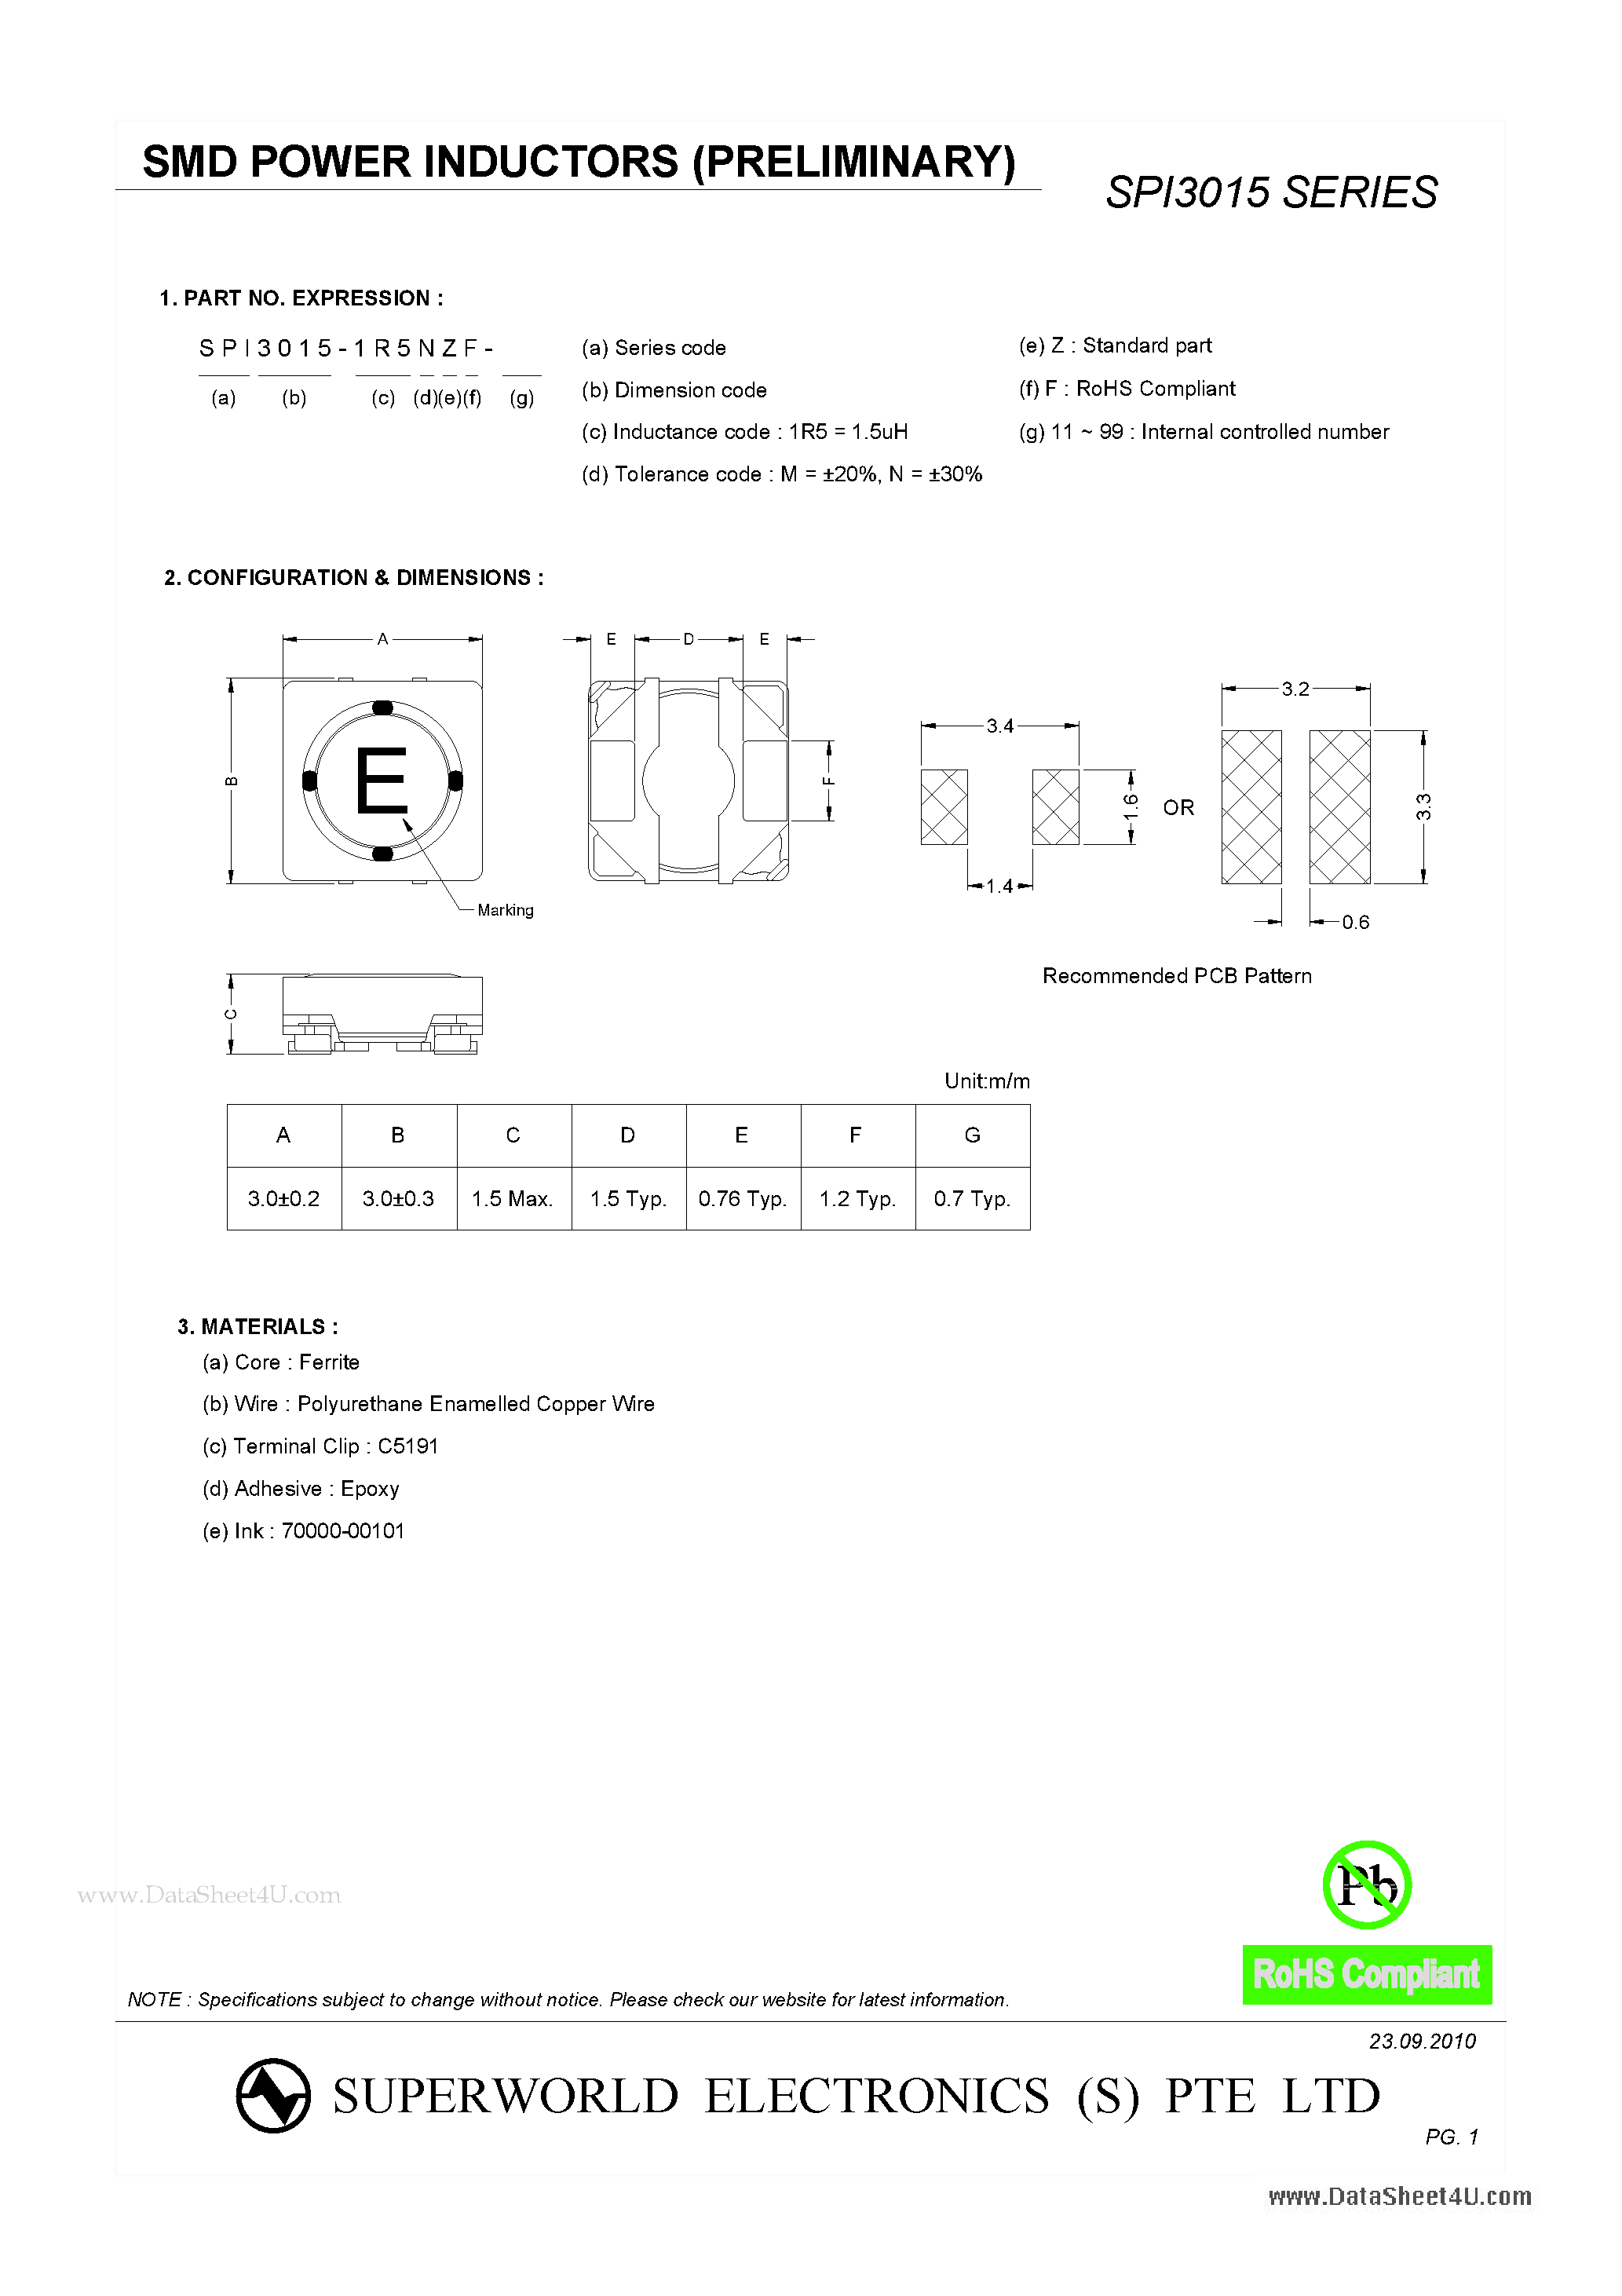 Datasheet SPI3015 - SMD POWER INDUCTORS page 1